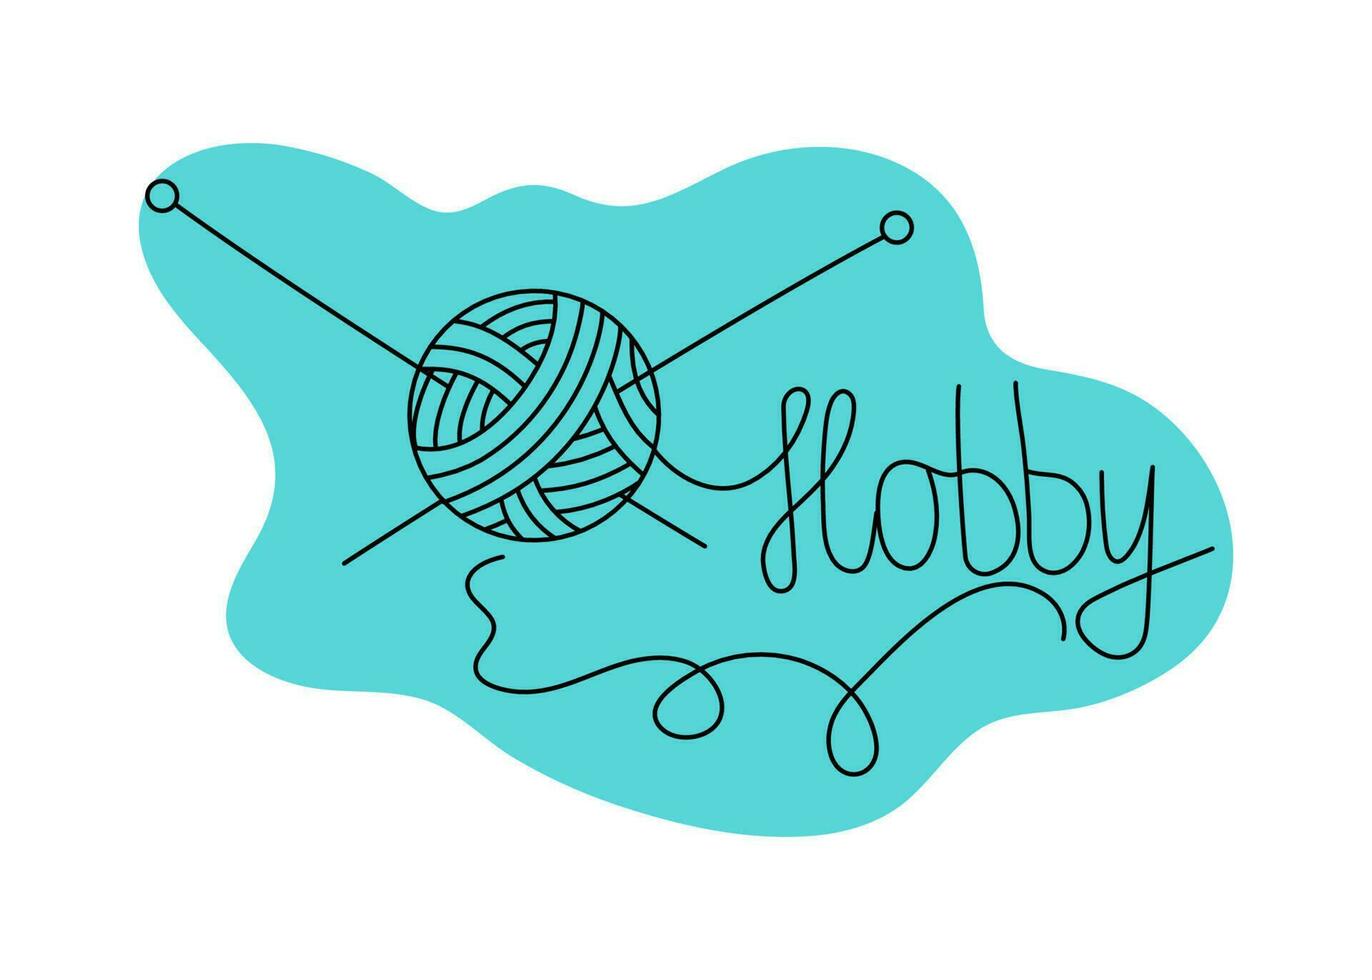 Skein of thread, ball of wool. Needles for knitting. Lettering, calligraphy. Hobbies.  Doodle style. Logo, Knitting, needlework sign.  Vector illustration. Background isolated.